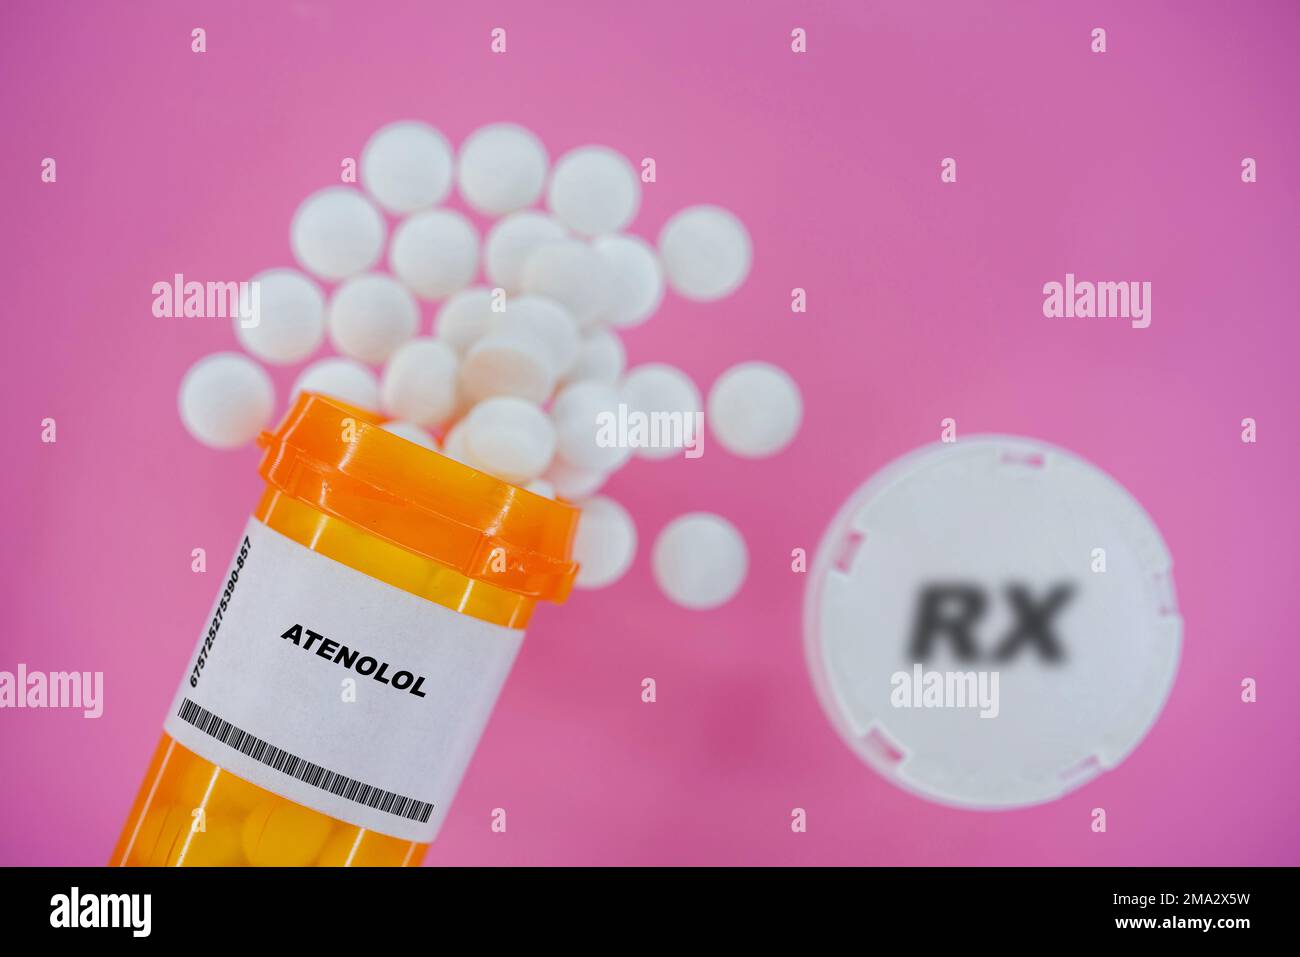 Atenolol Rx medicine pills in plactic vial with tablets. Pills spilling   from yellow container on pink background. Stock Photo